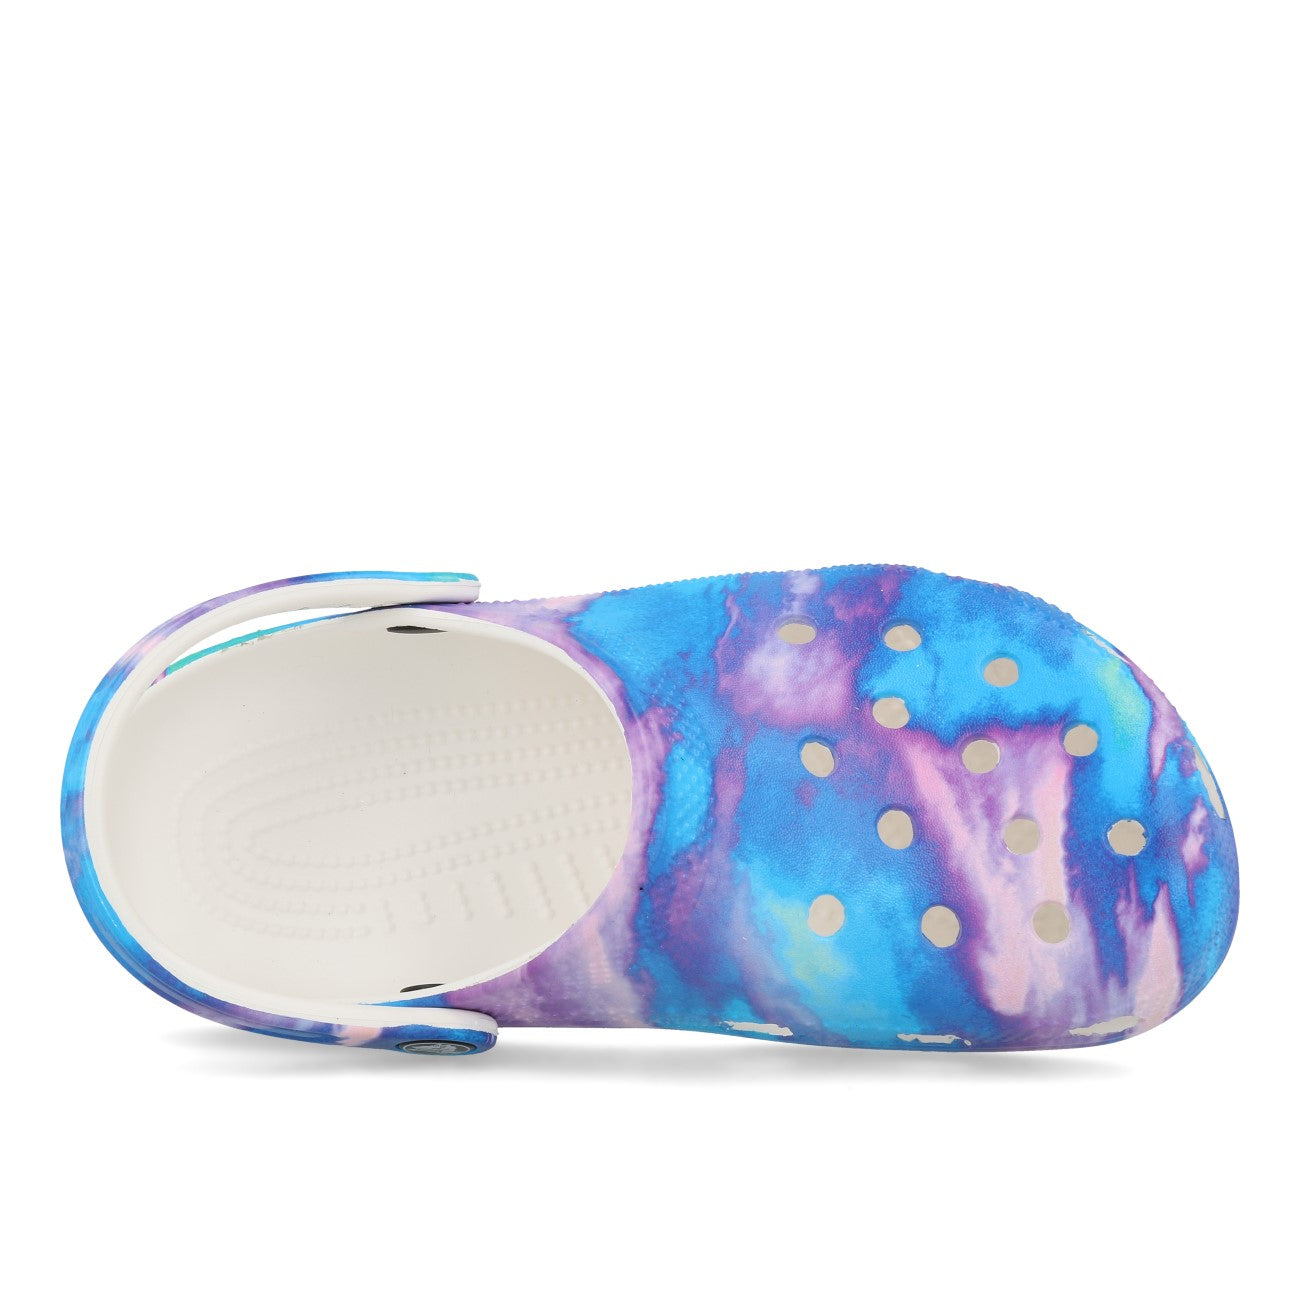 Crocs Classic Out of this World II Clog Multi